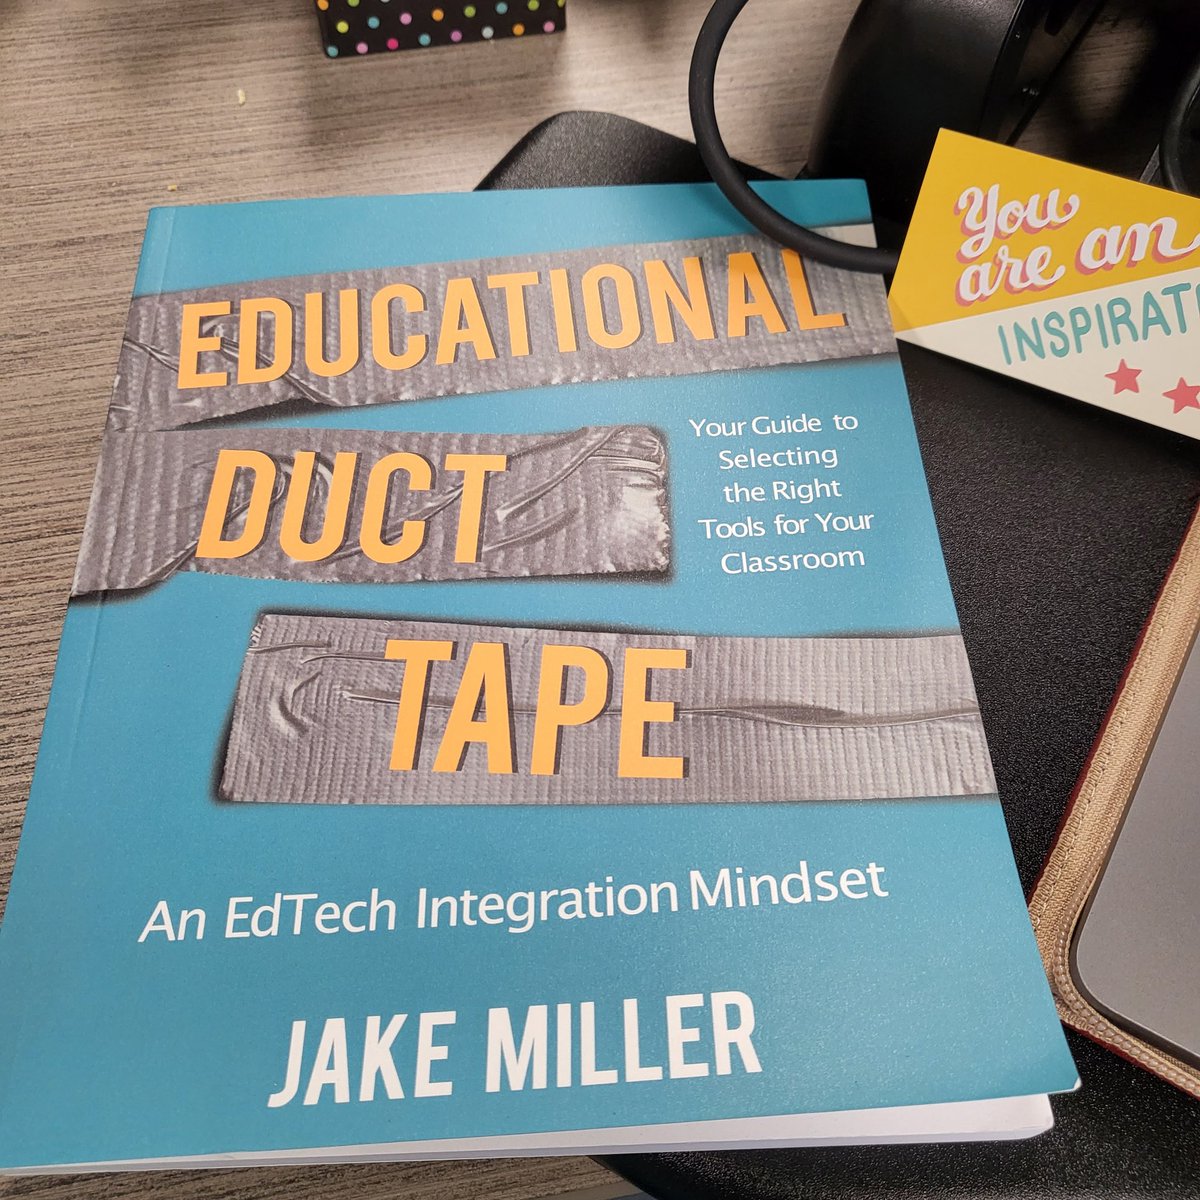 Thank you thank you thank you @JakeMillerTech ! Receiving this made my day! #edtech #EduDuctTape